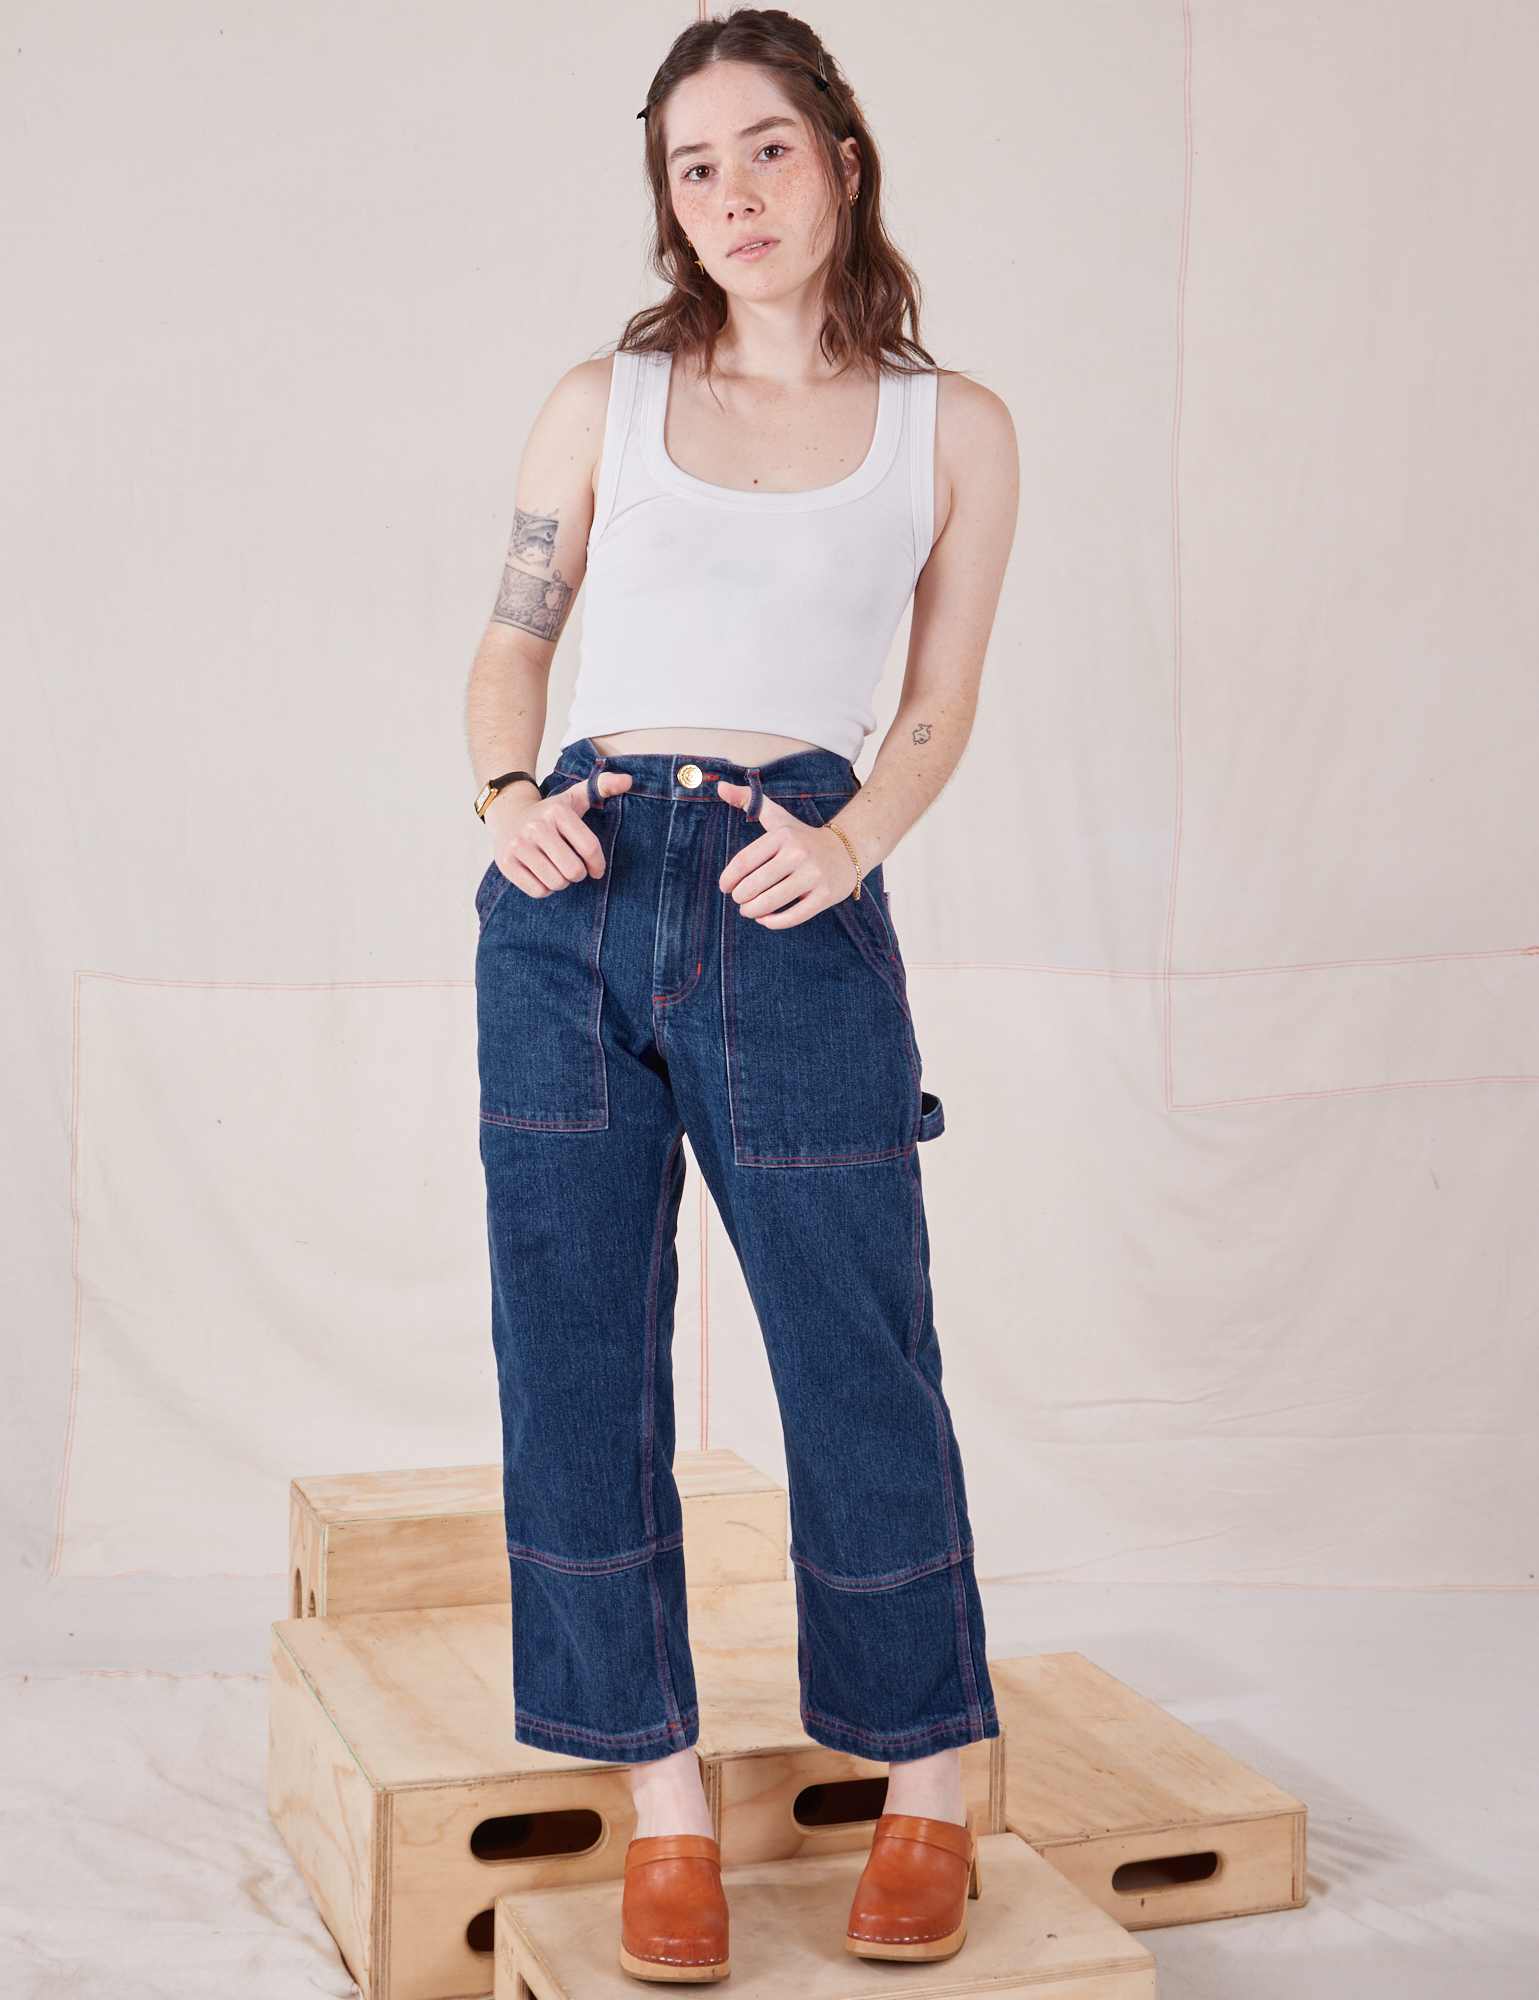 Hana is 5&#39;3&quot; and wearing XXS Petite Carpenter Jeans in Dark Wash paired with a vintage off-white Cropped Tank